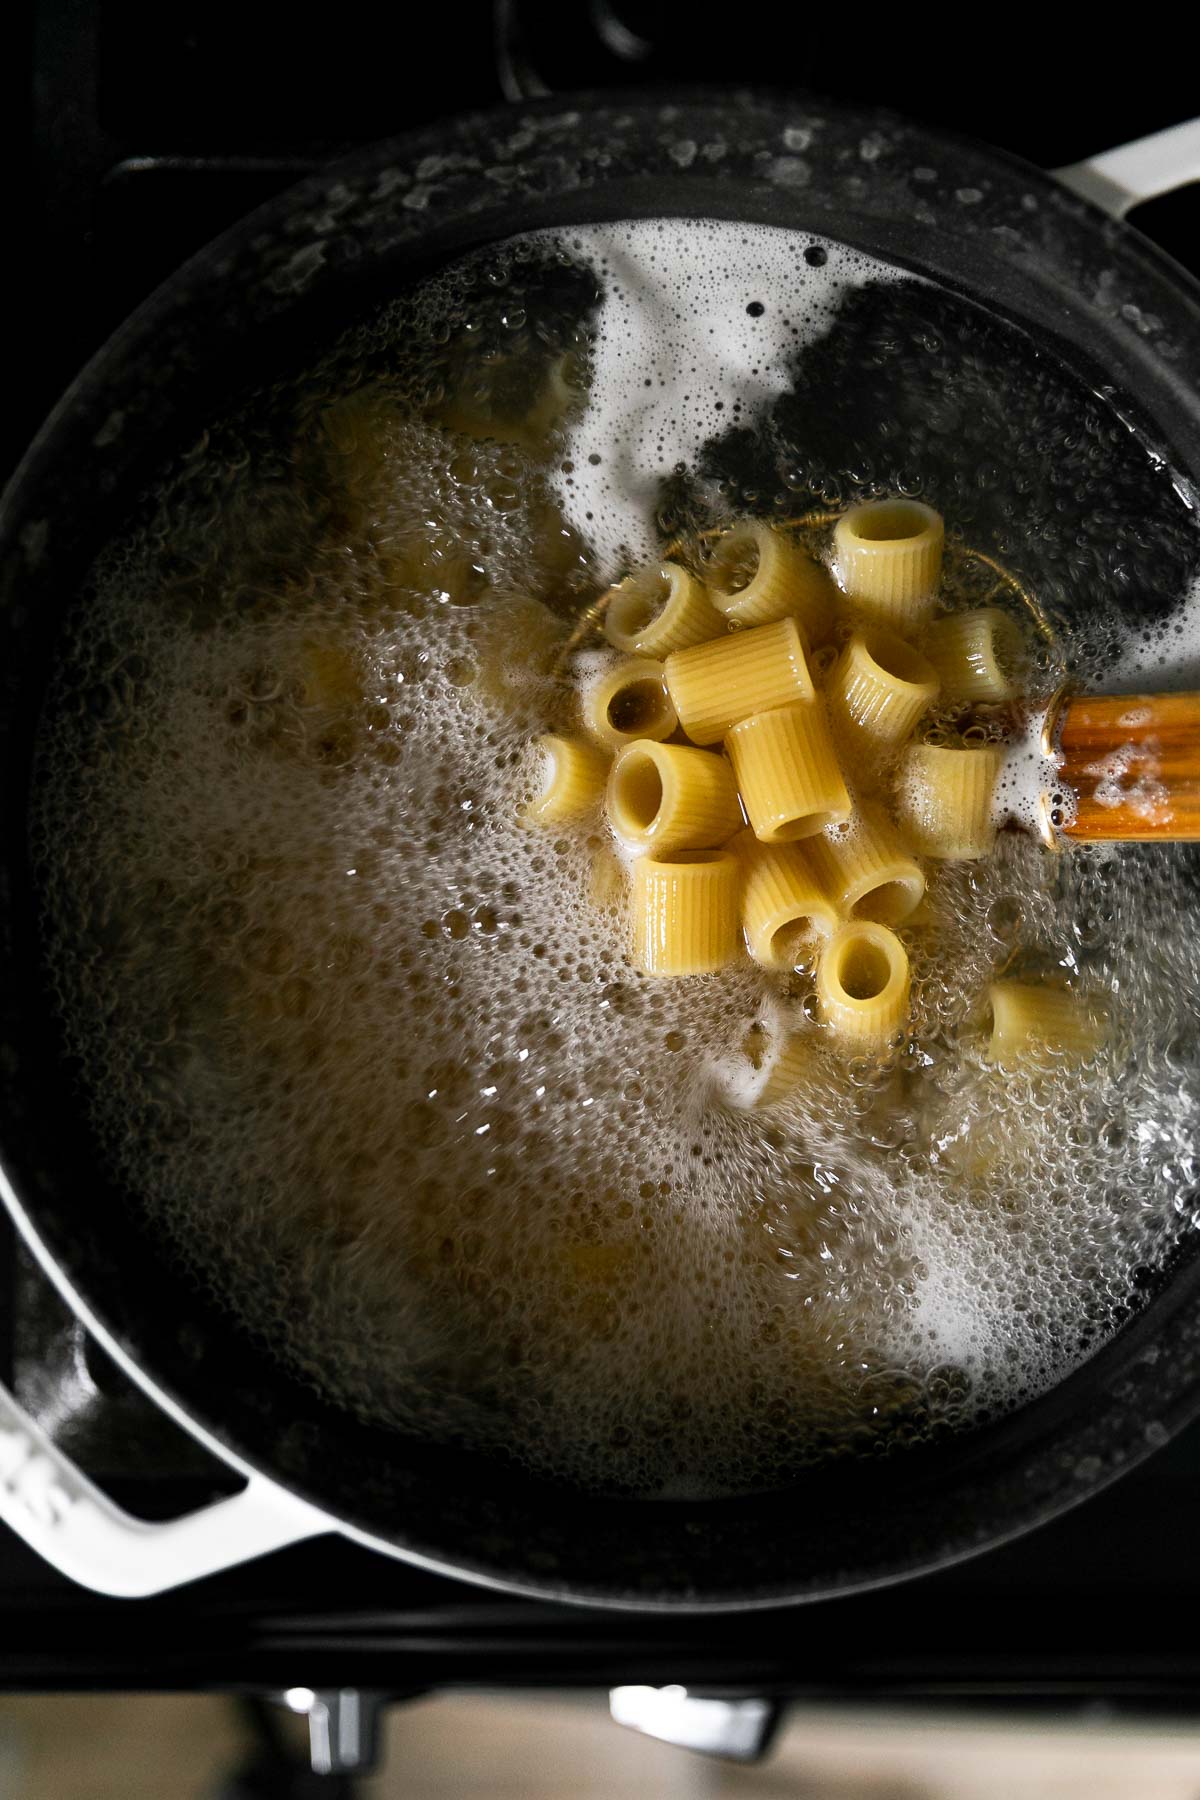 https://playswellwithbutter.com/wp-content/uploads/2021/10/How-to-Cook-Pasta-Perfectly-16.jpg